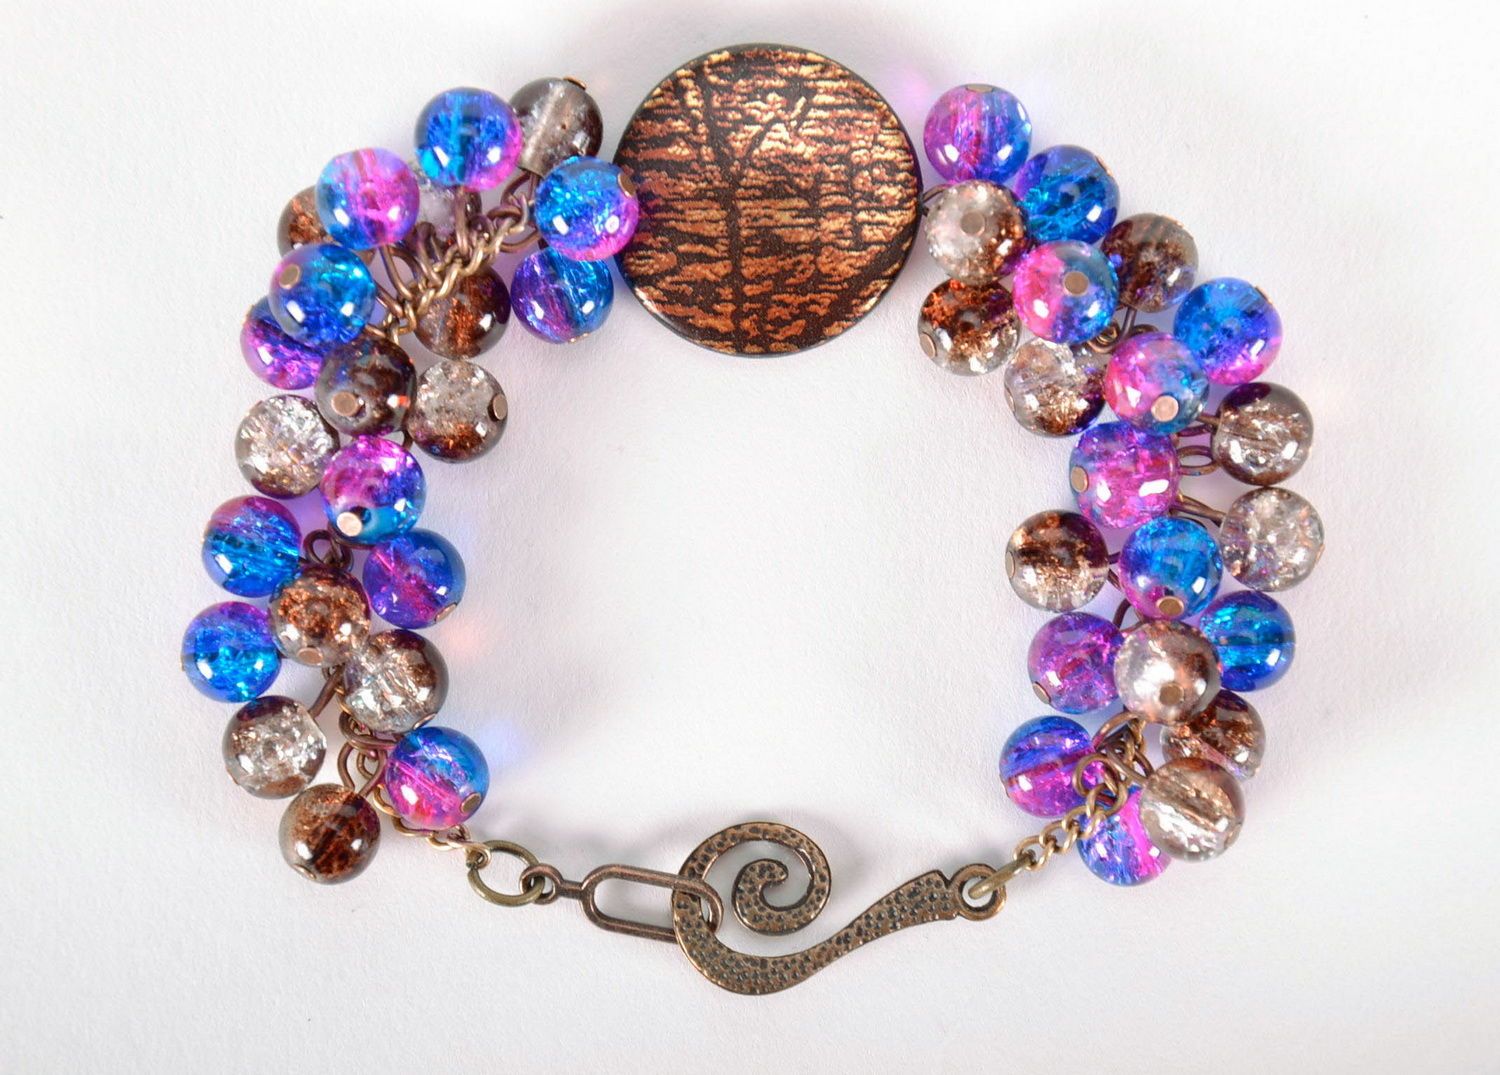 Handmade bracelet made from multi-colored beads photo 2